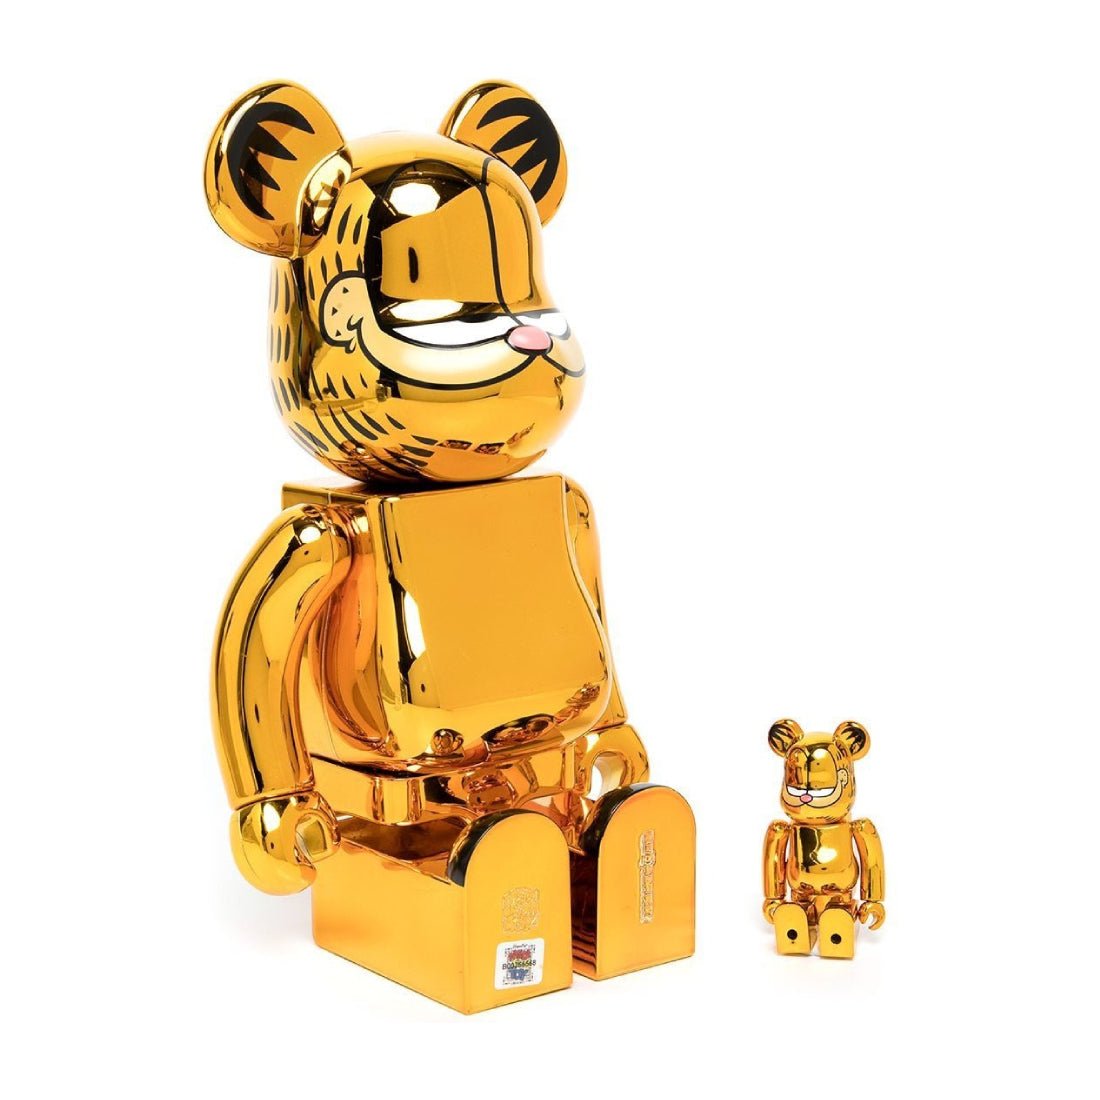 (Pre-Owned) BE@RBRICK - Garfield: Gold Chrome Version - مجسم - Store 974 | ستور ٩٧٤